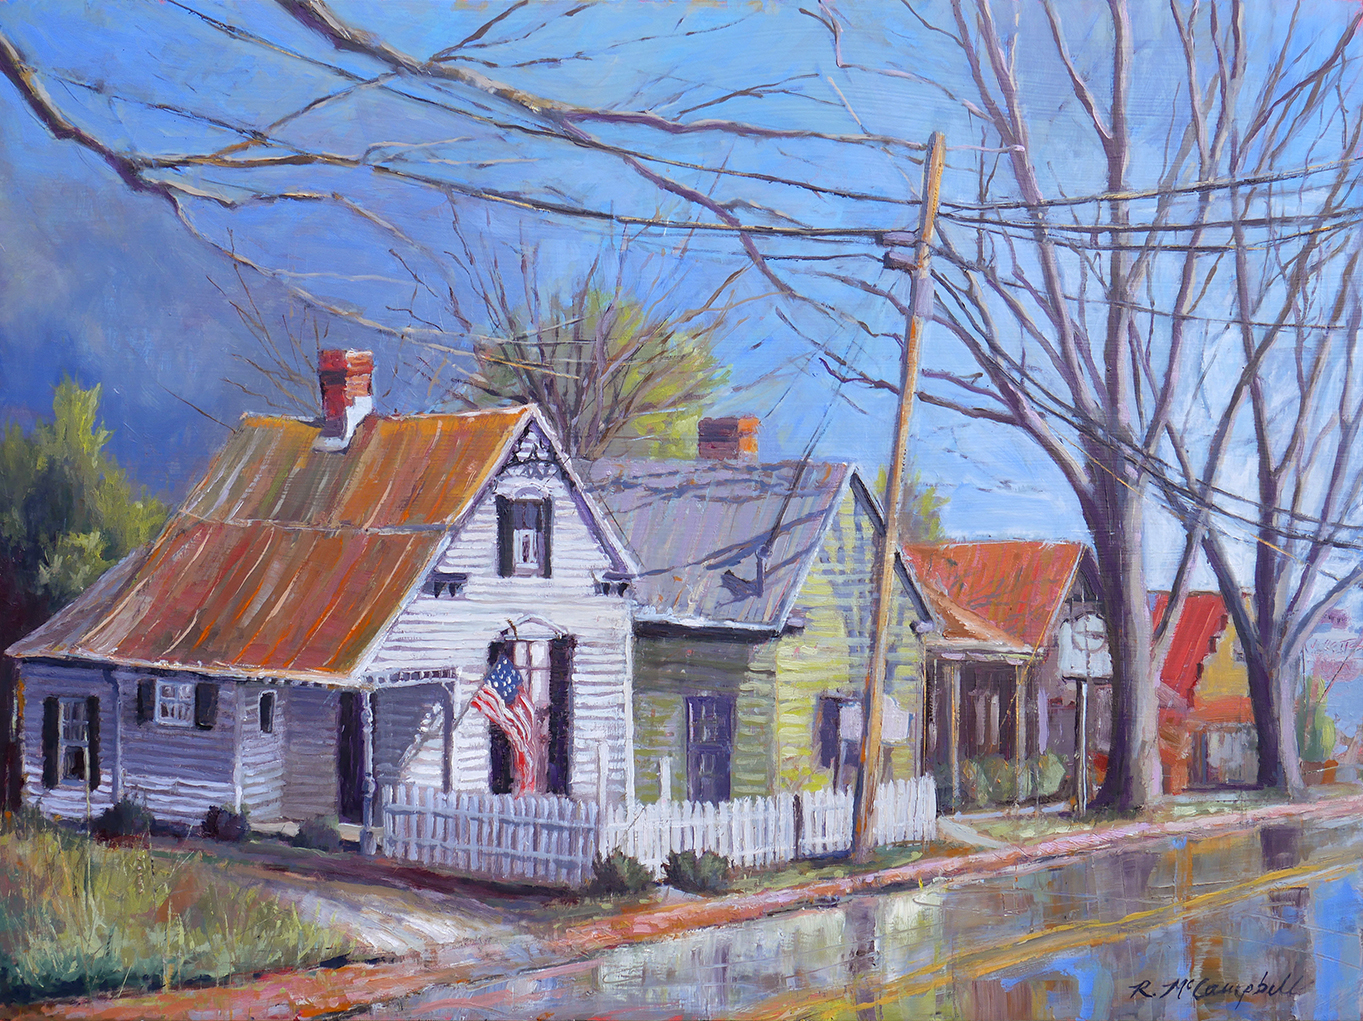 "Leiper's Fork Village,"  Oil on panel, 18" h x 24" w  by Rachael McCampbell ©2021